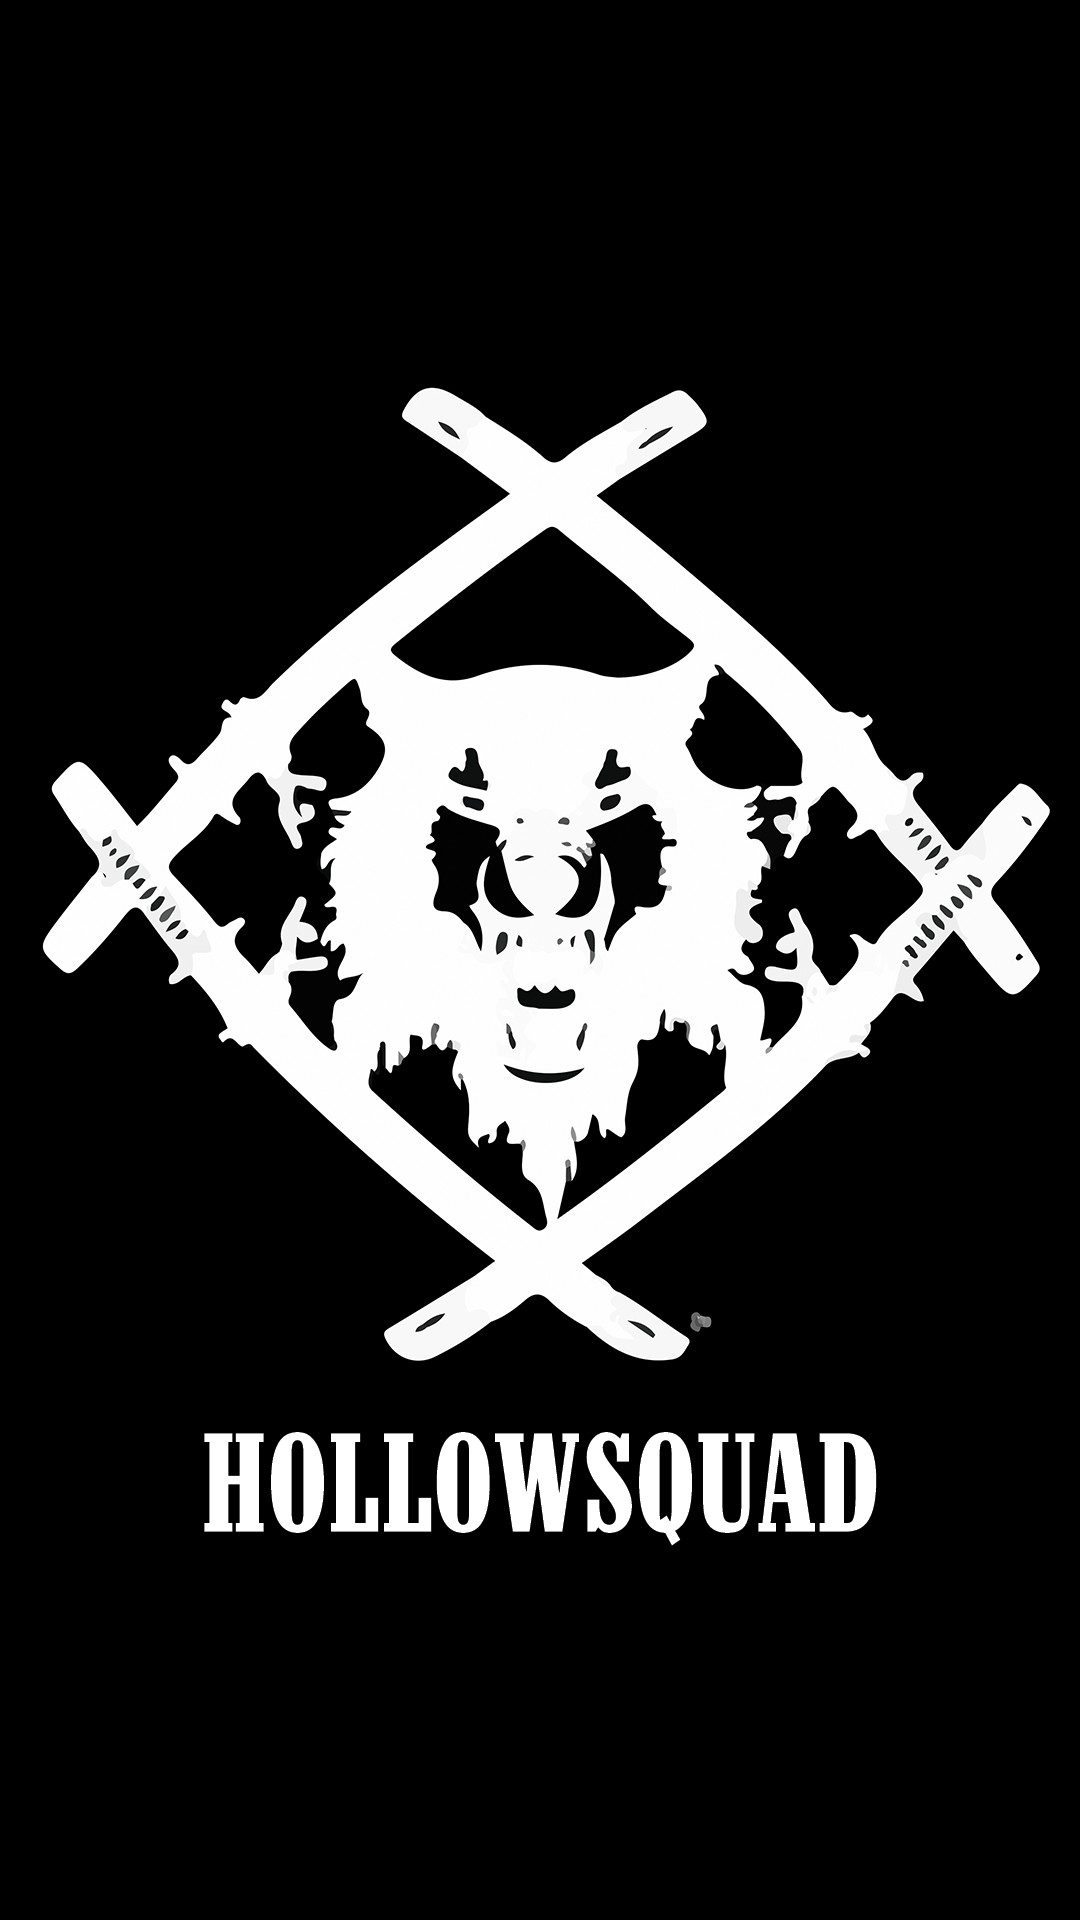 1080x1920 Made some HQ Sesh and Hollowsquad iPhone 6 and iPhone 6 Plus wallpapers  since I see so much about finding them on here... If anyone has some  requests go ...